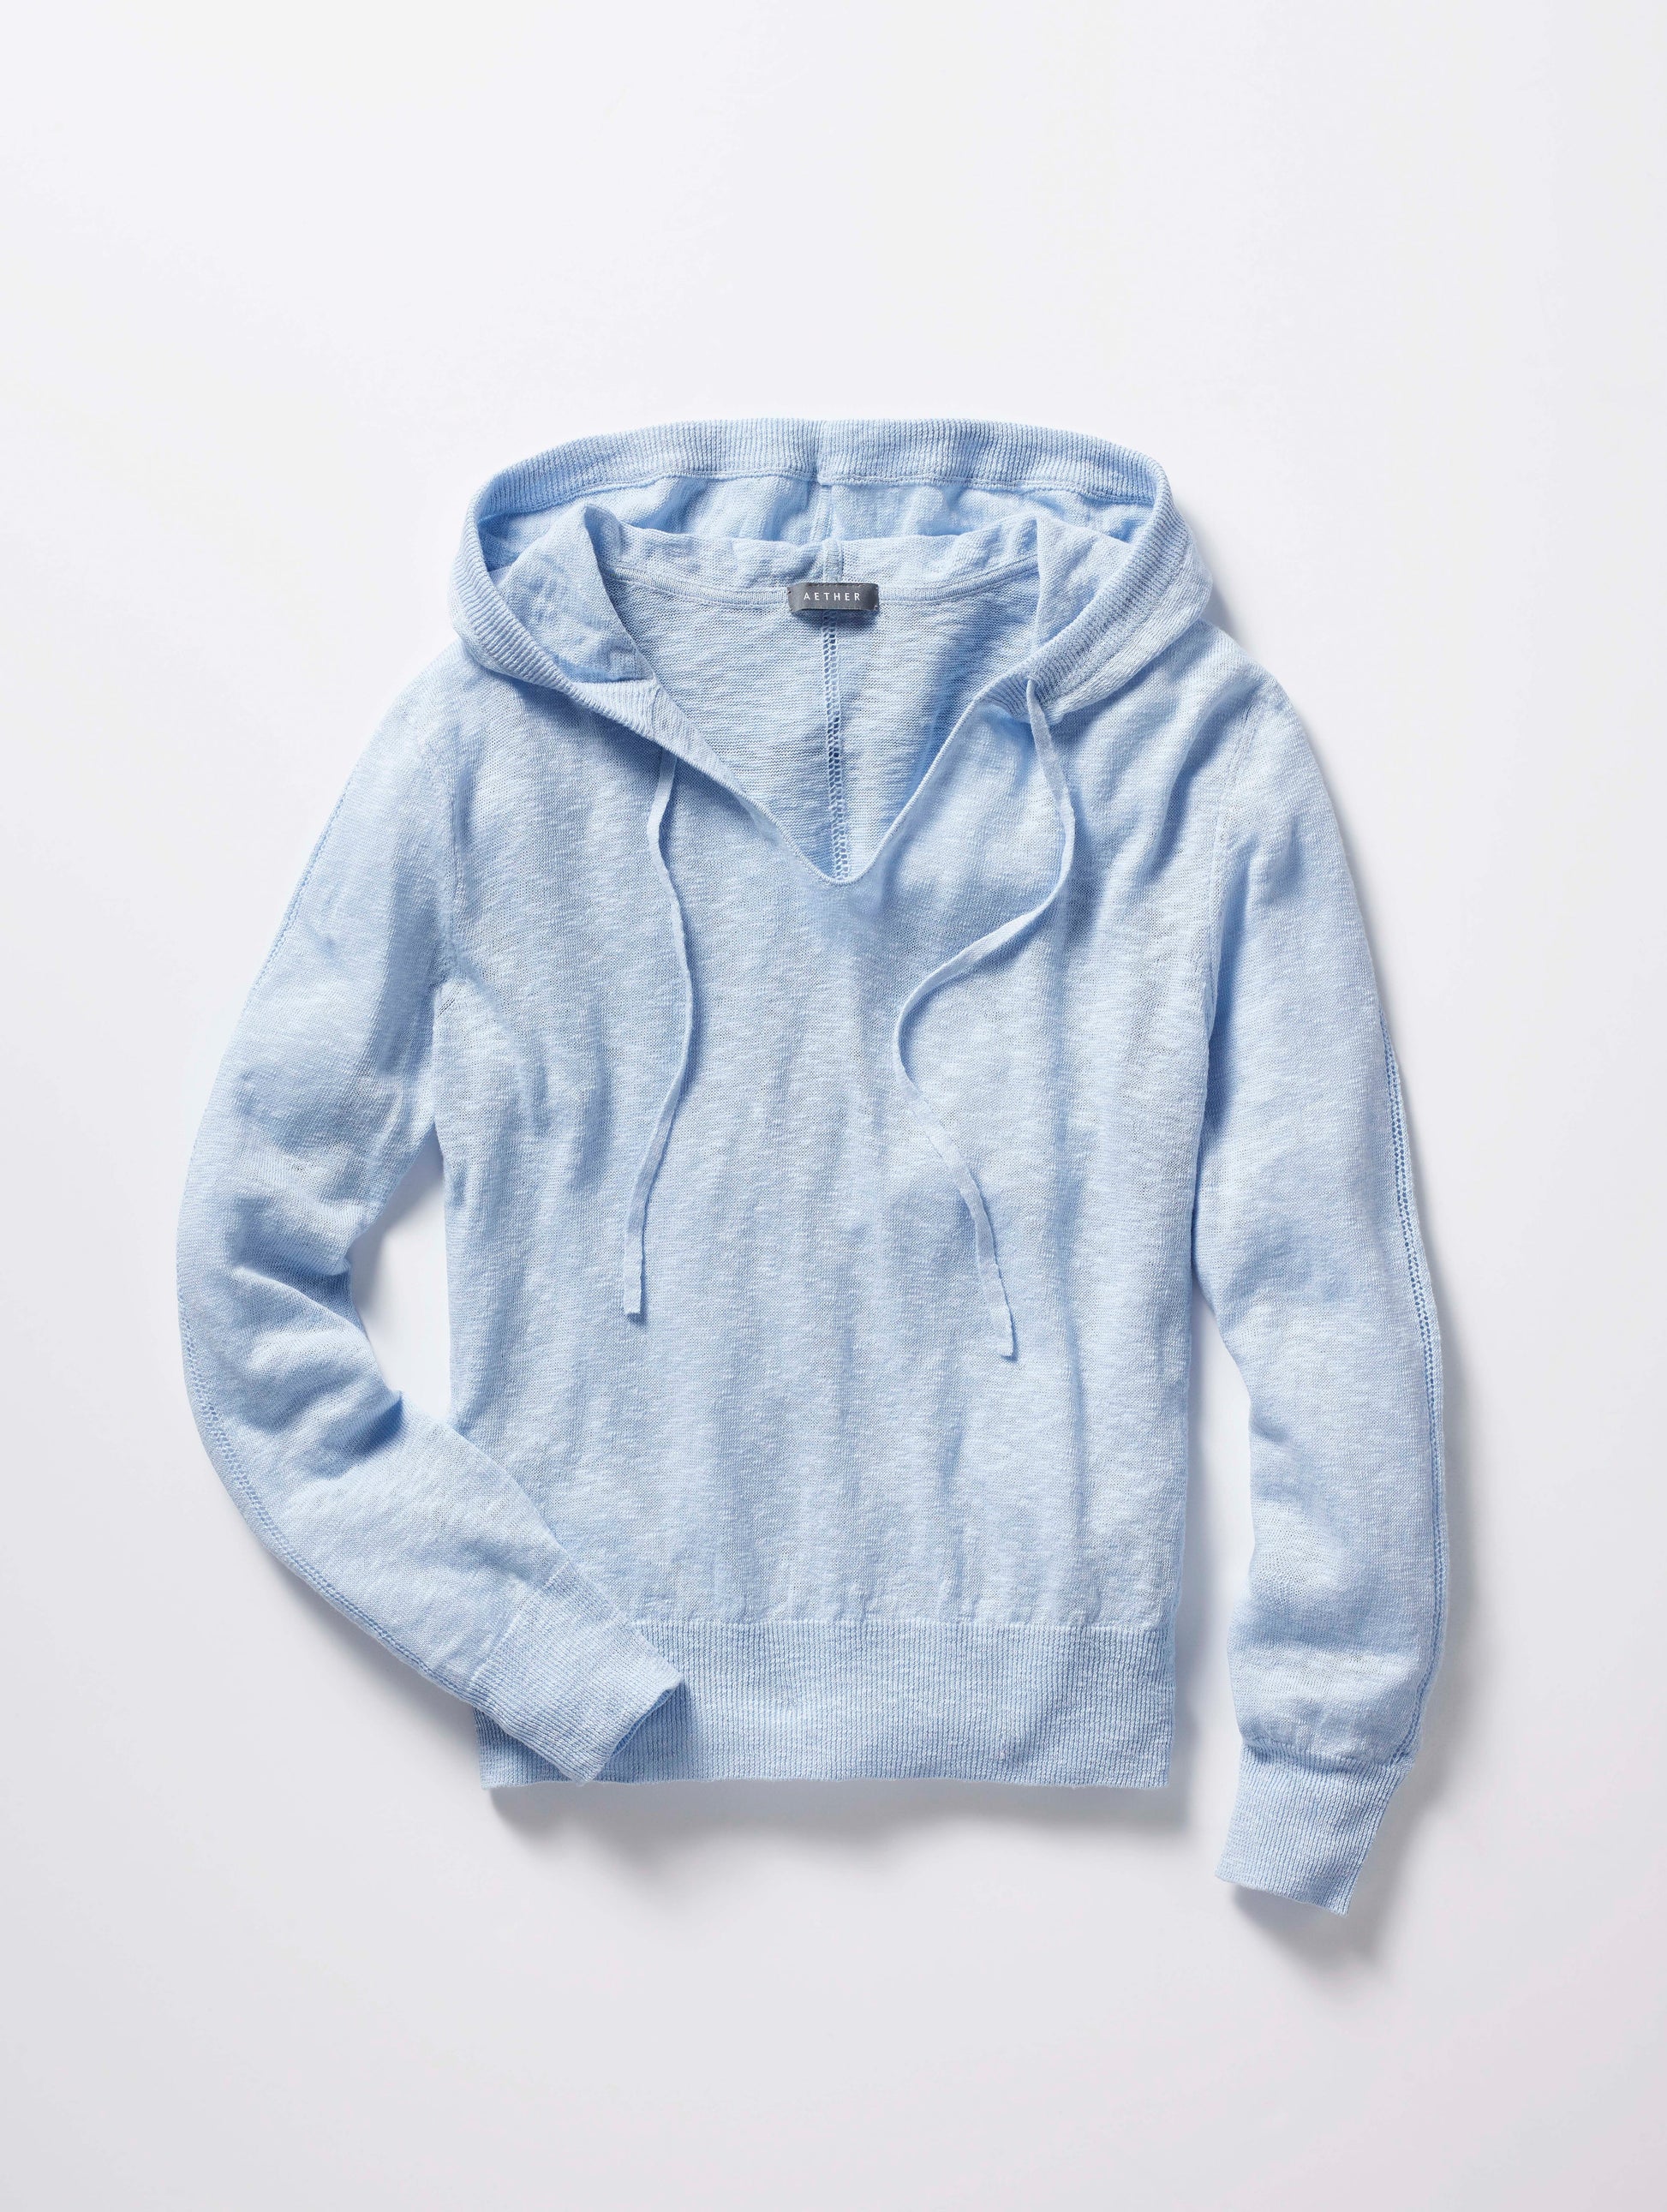 blue sweater for women from Aether Apparel